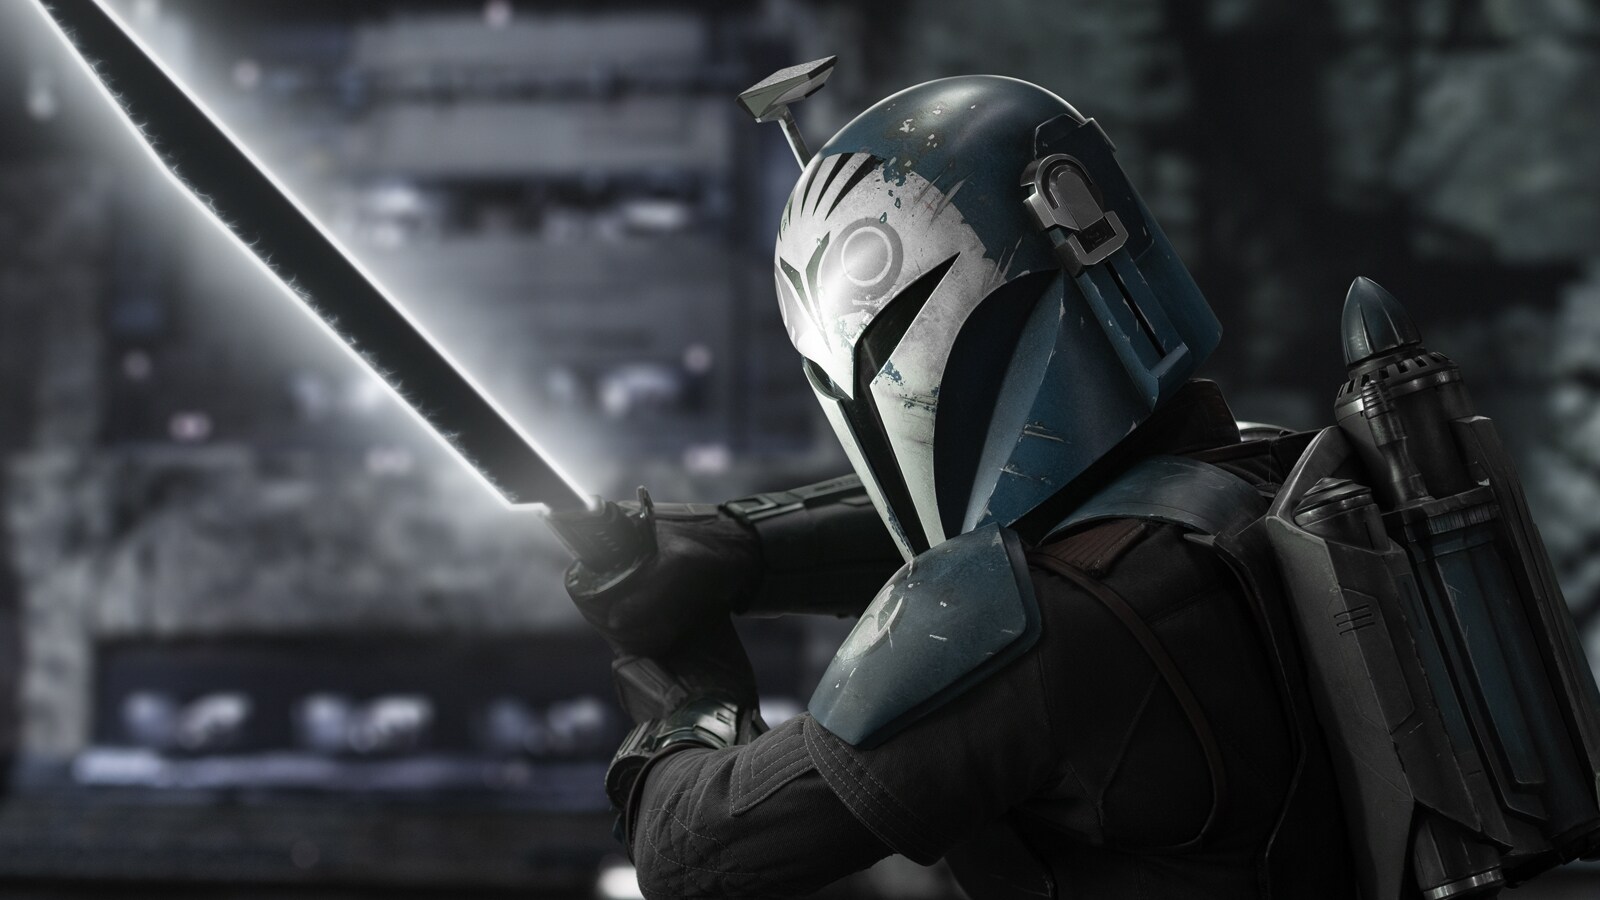 Bounty Hunting Highlights: 5 of Our Favorite Moments from The Mandalorian – “Chapter 24: The Return”